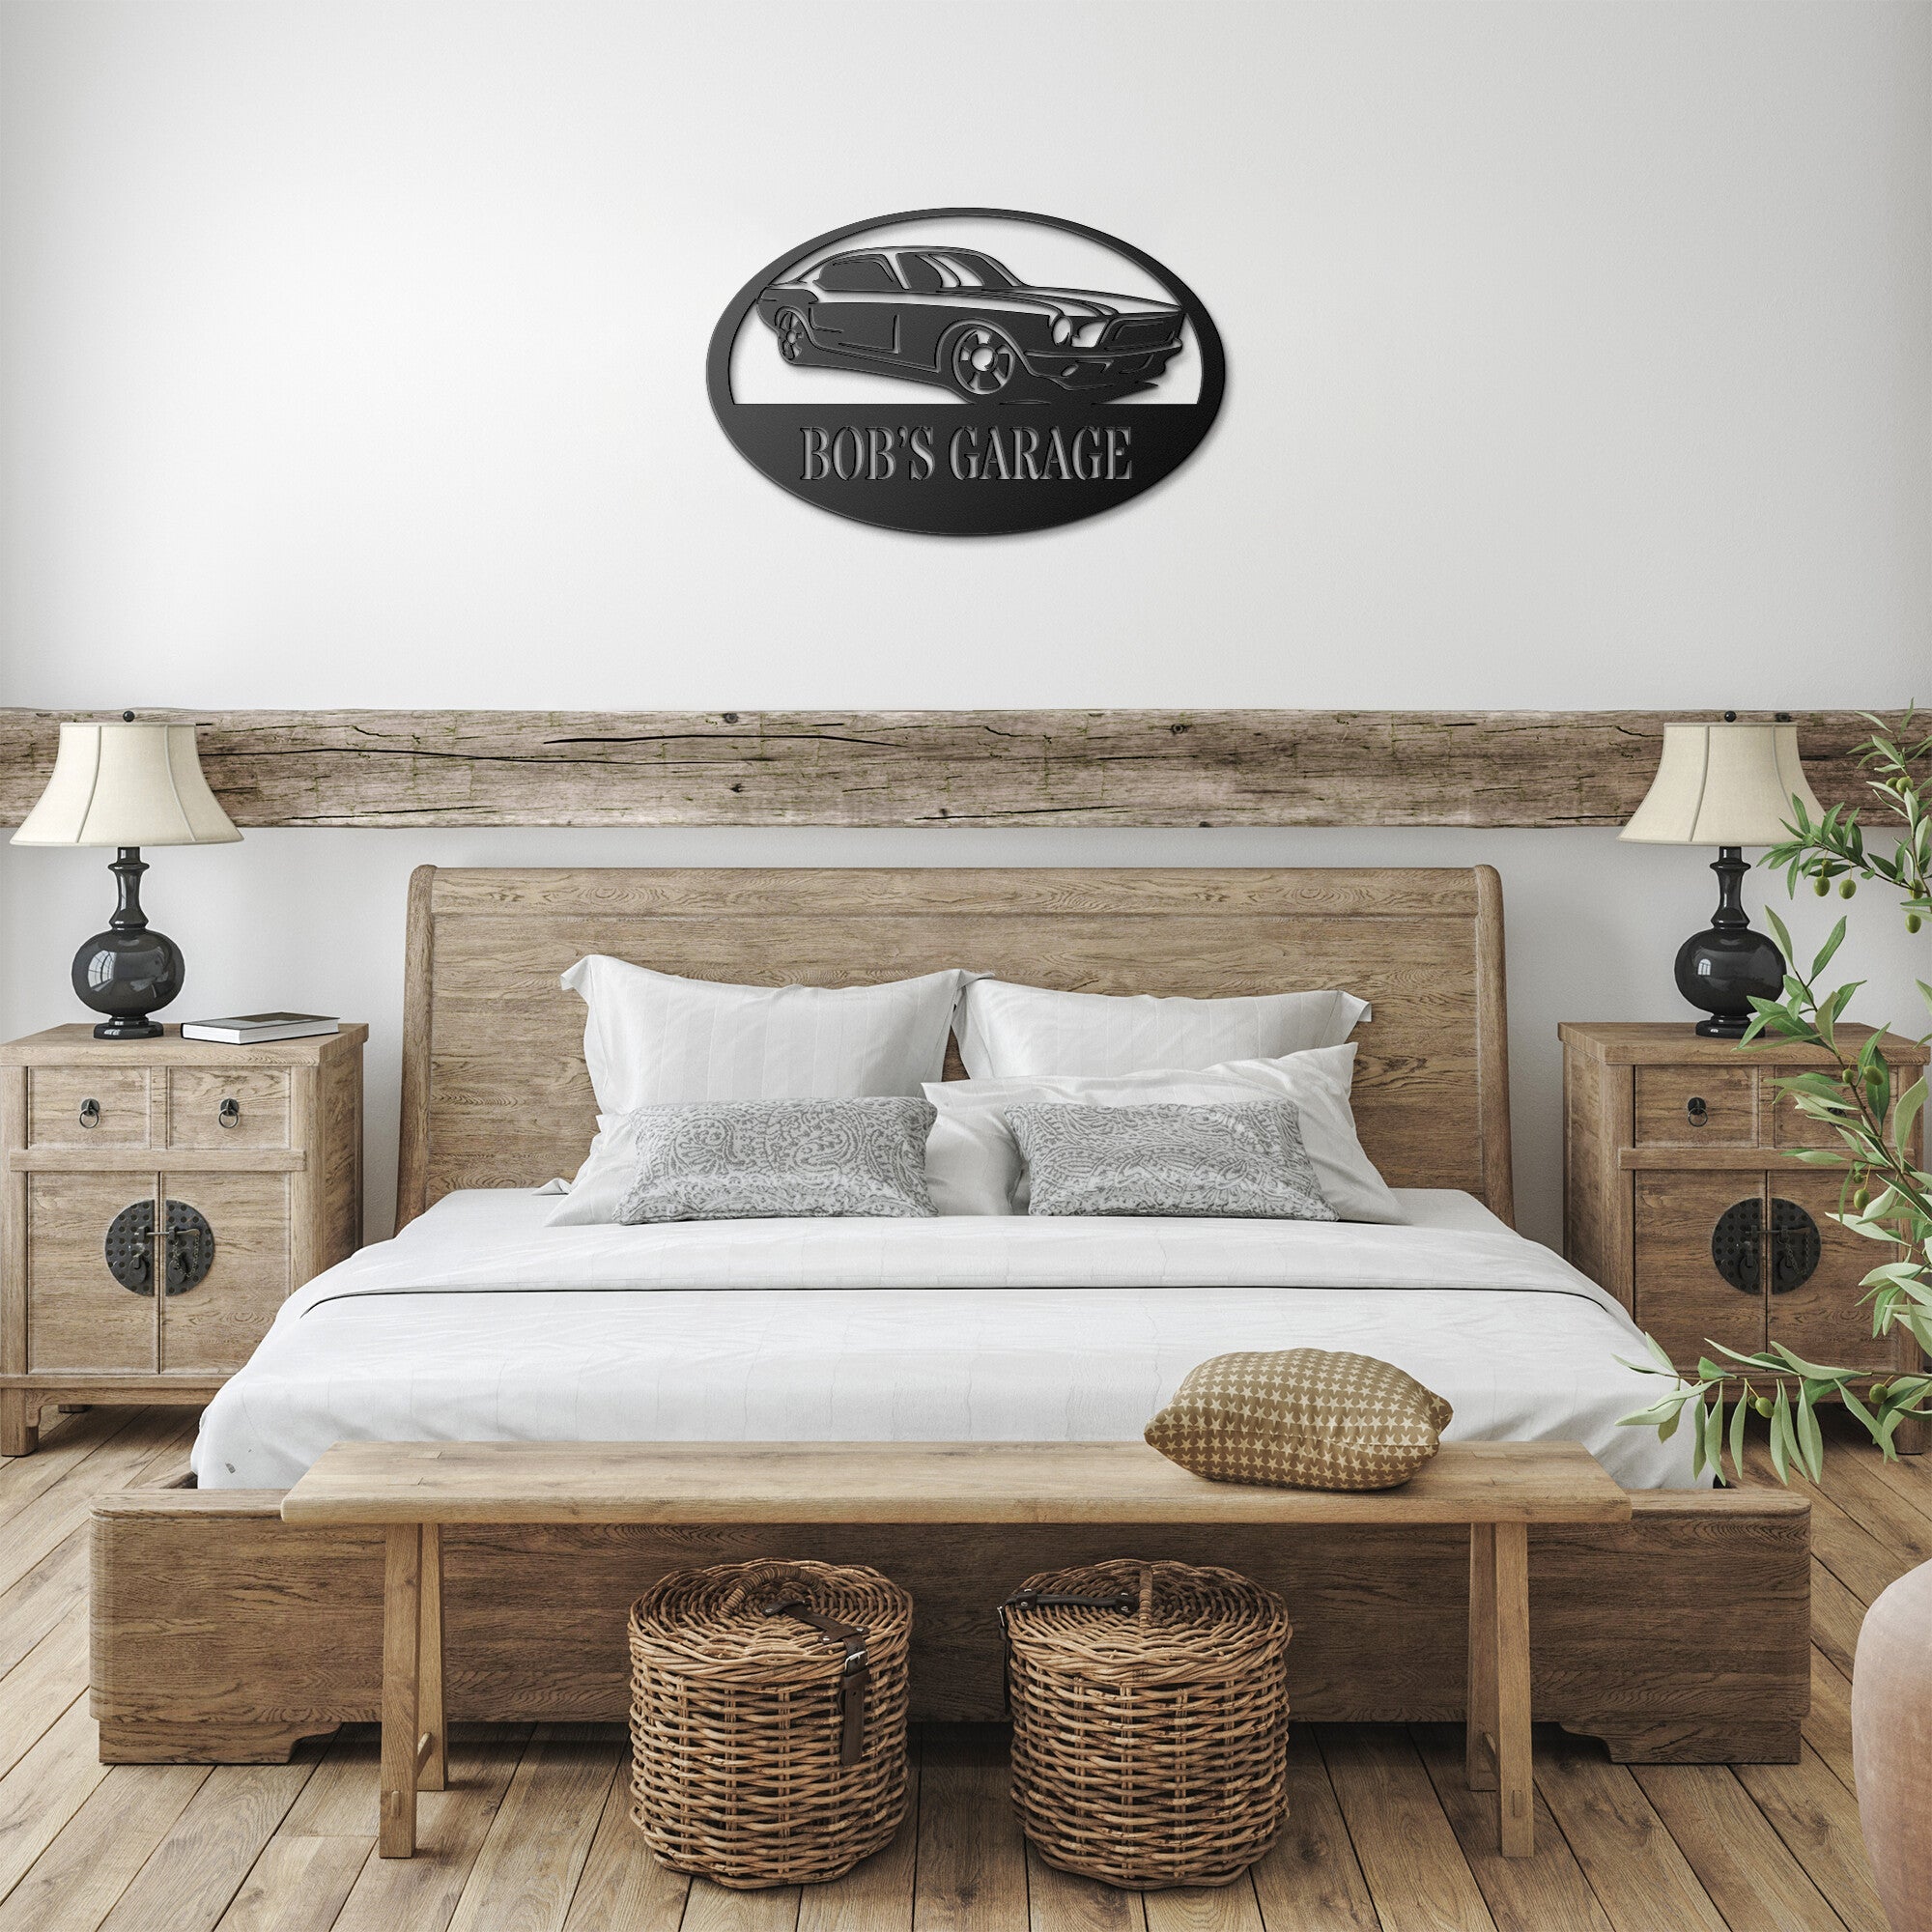 Personalized Muscle Car Sign - Cool Metal Signs